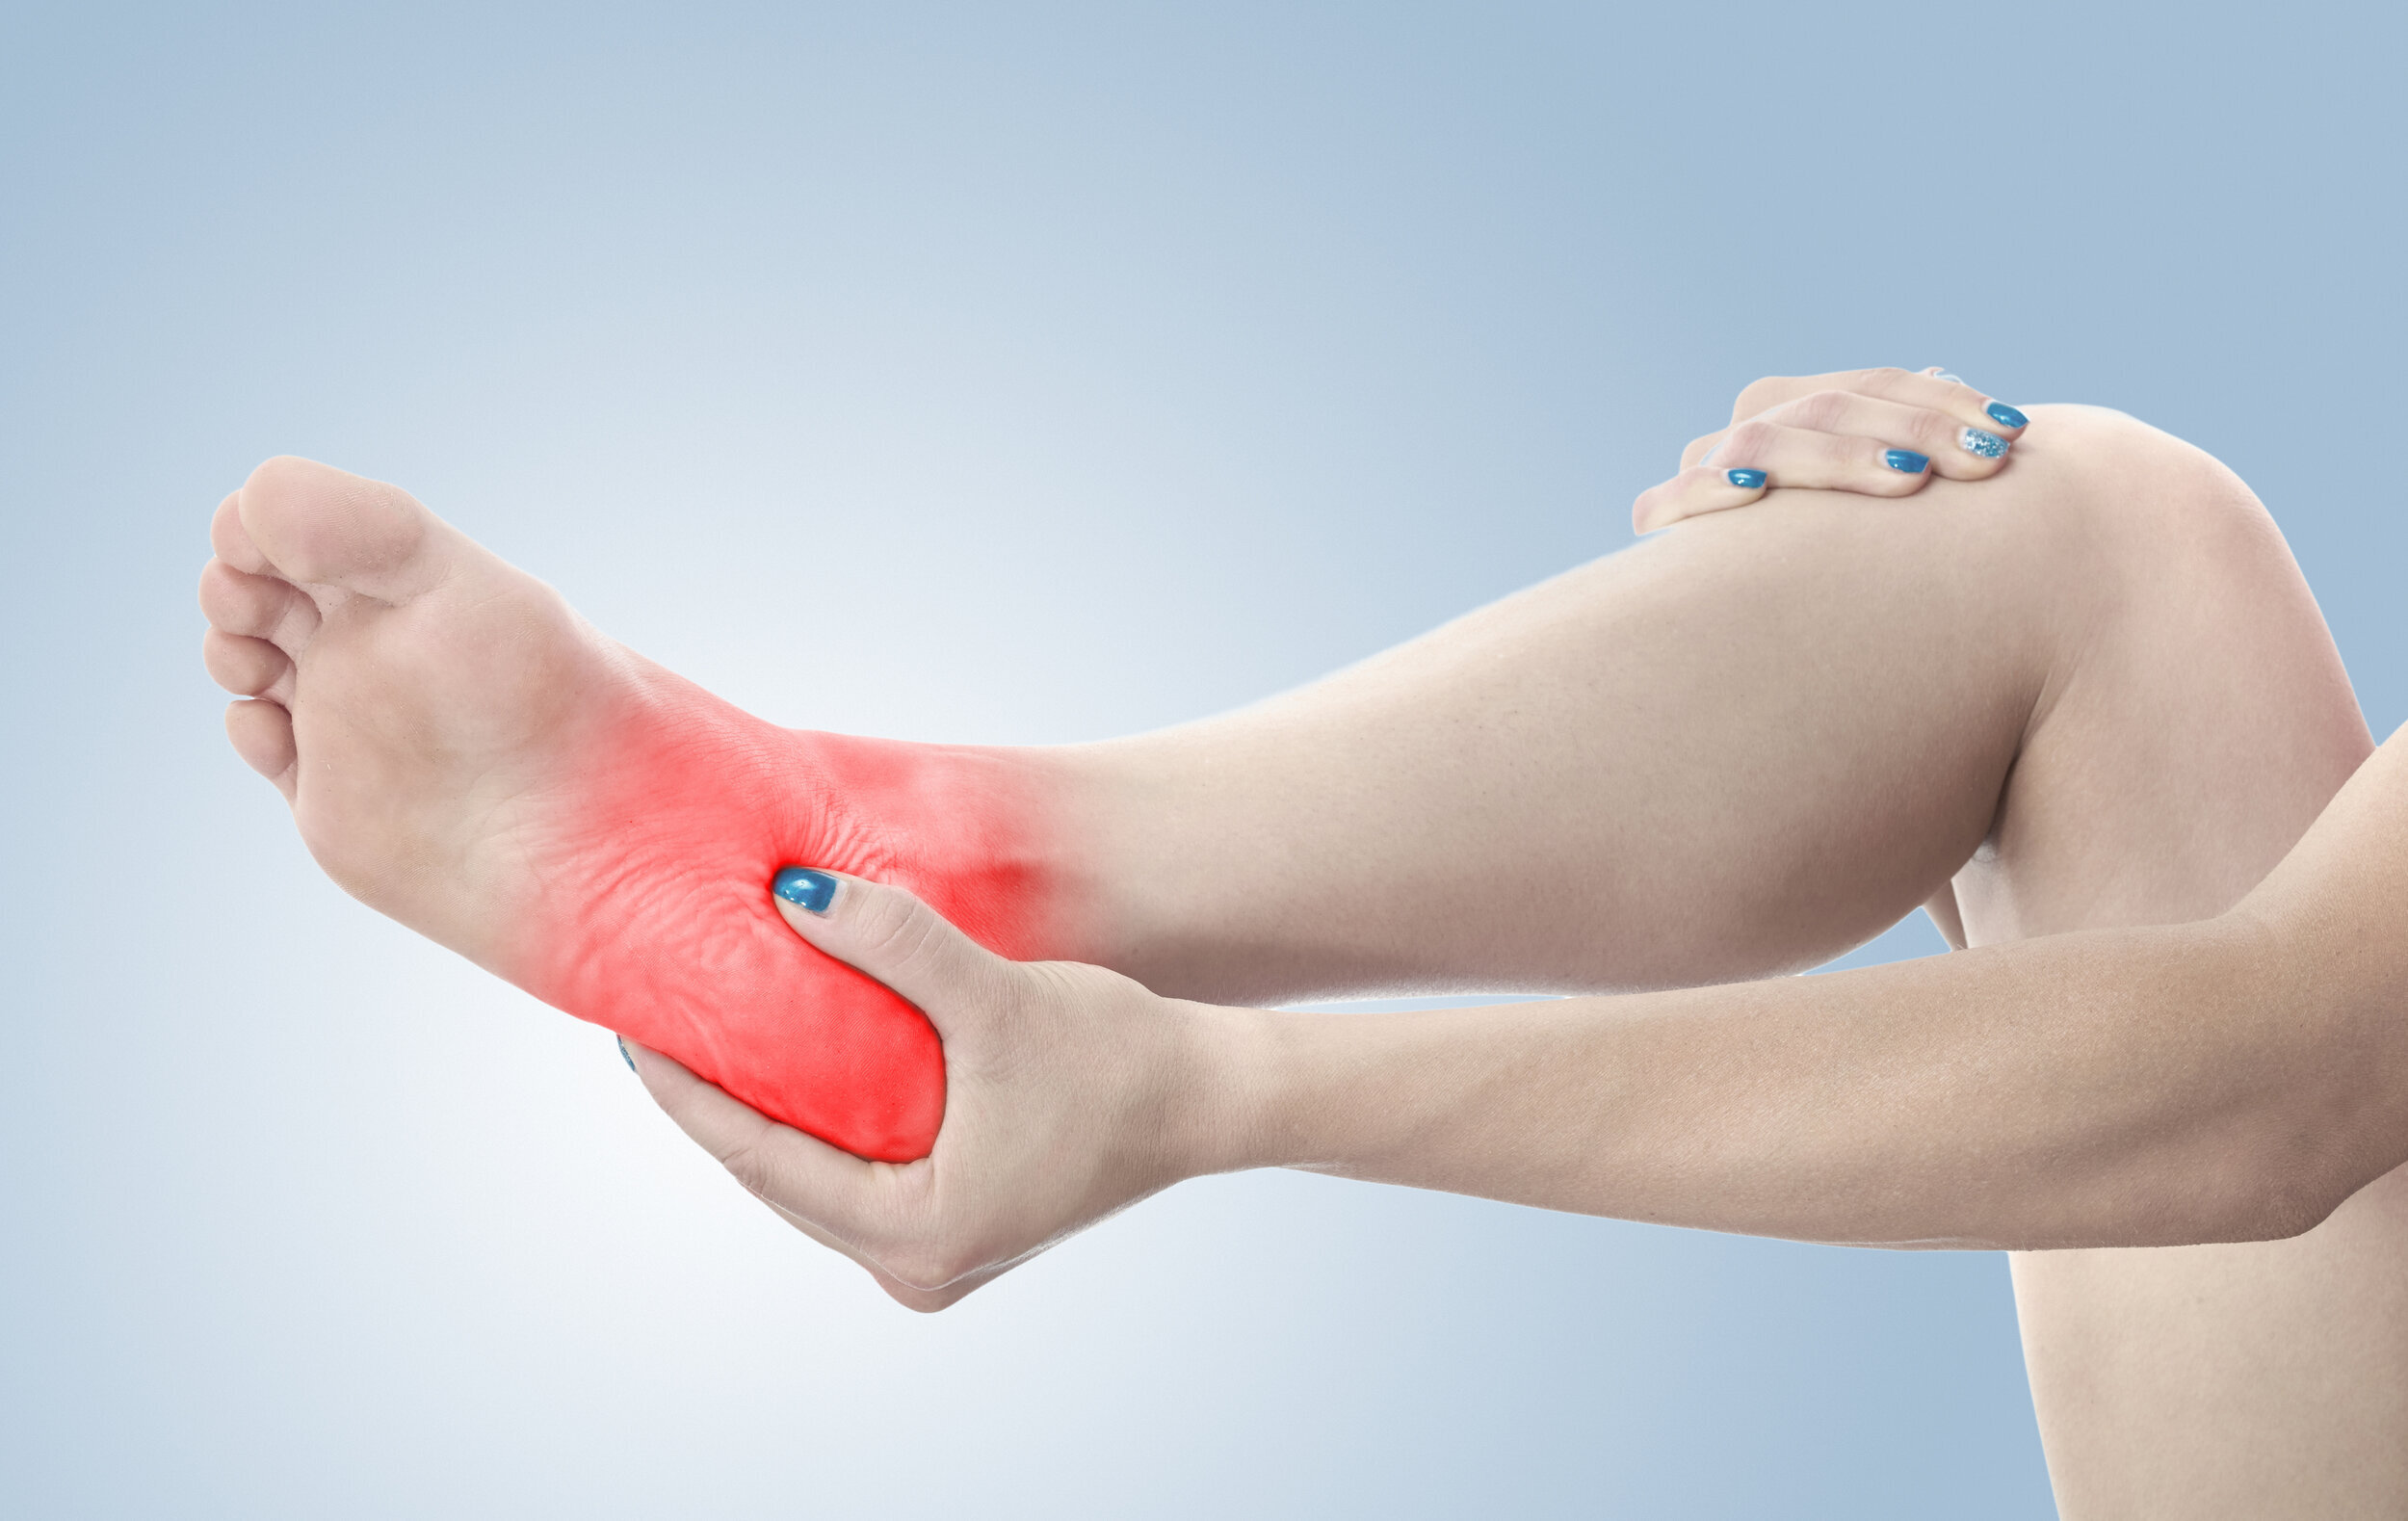 Home Remedies for Heel Pain and the Plantar Fascia